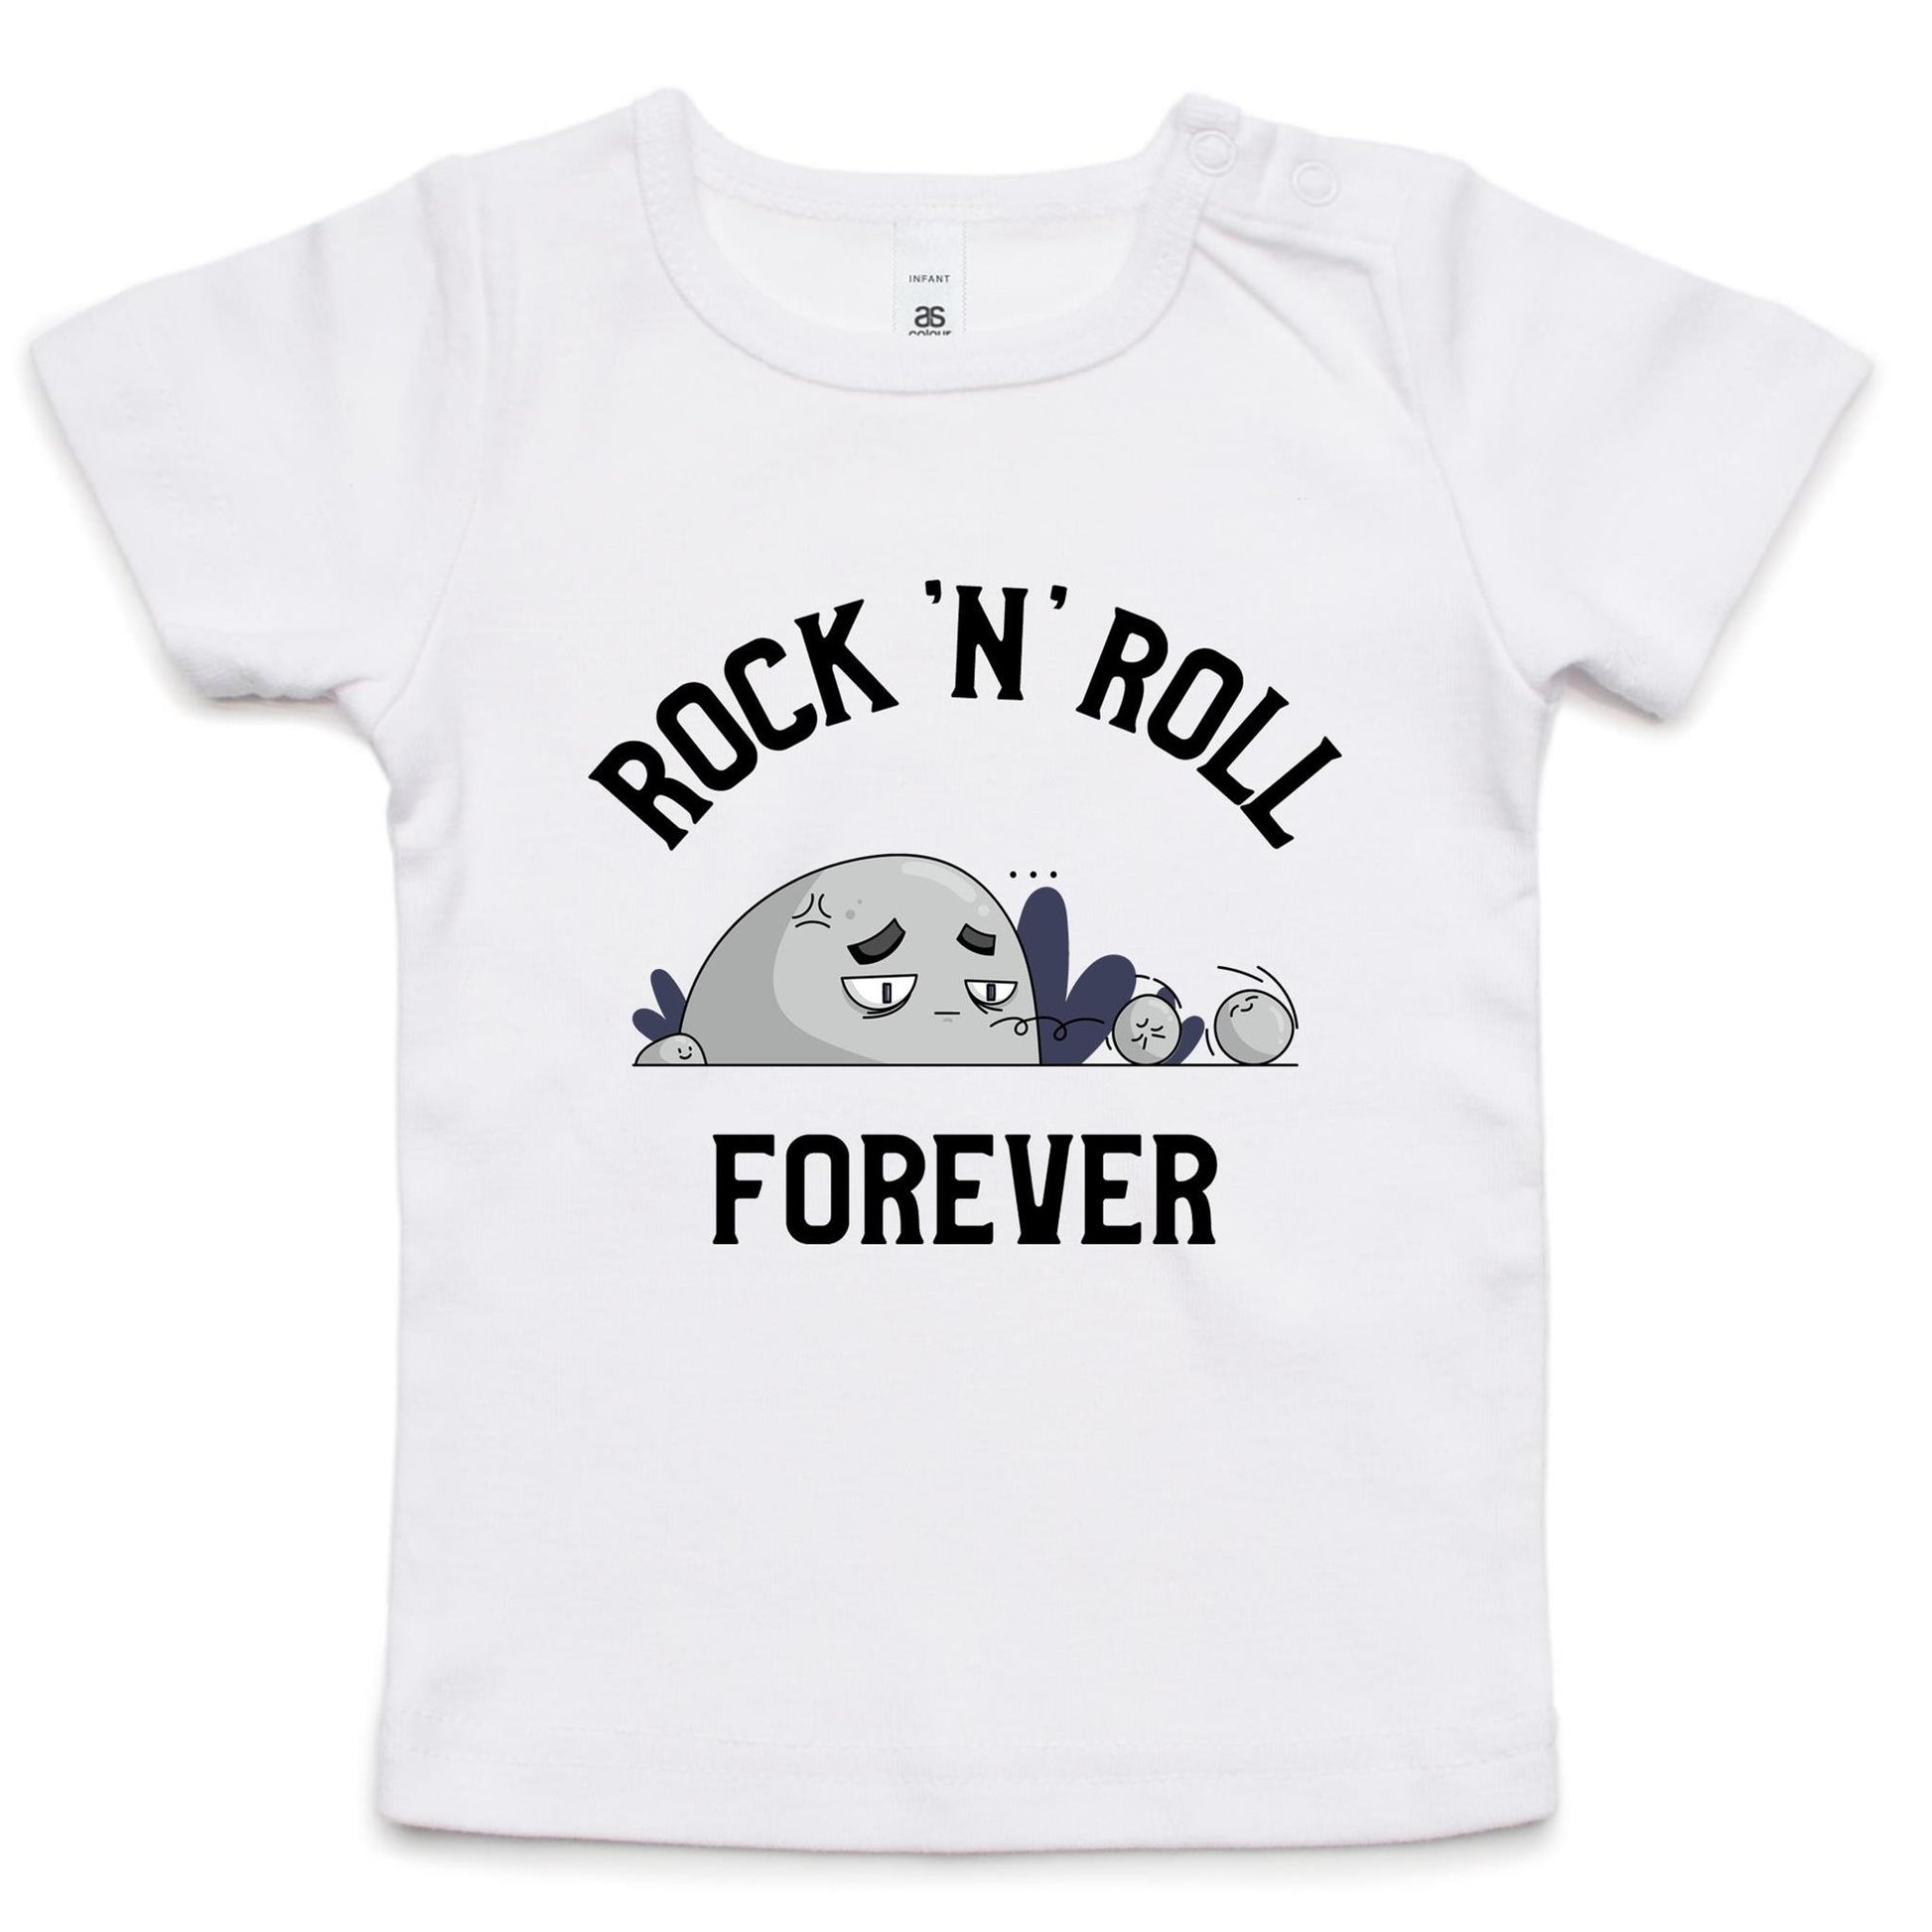 Rock 'N' Roll Forever - Baby T-shirt White Baby T-shirt Music